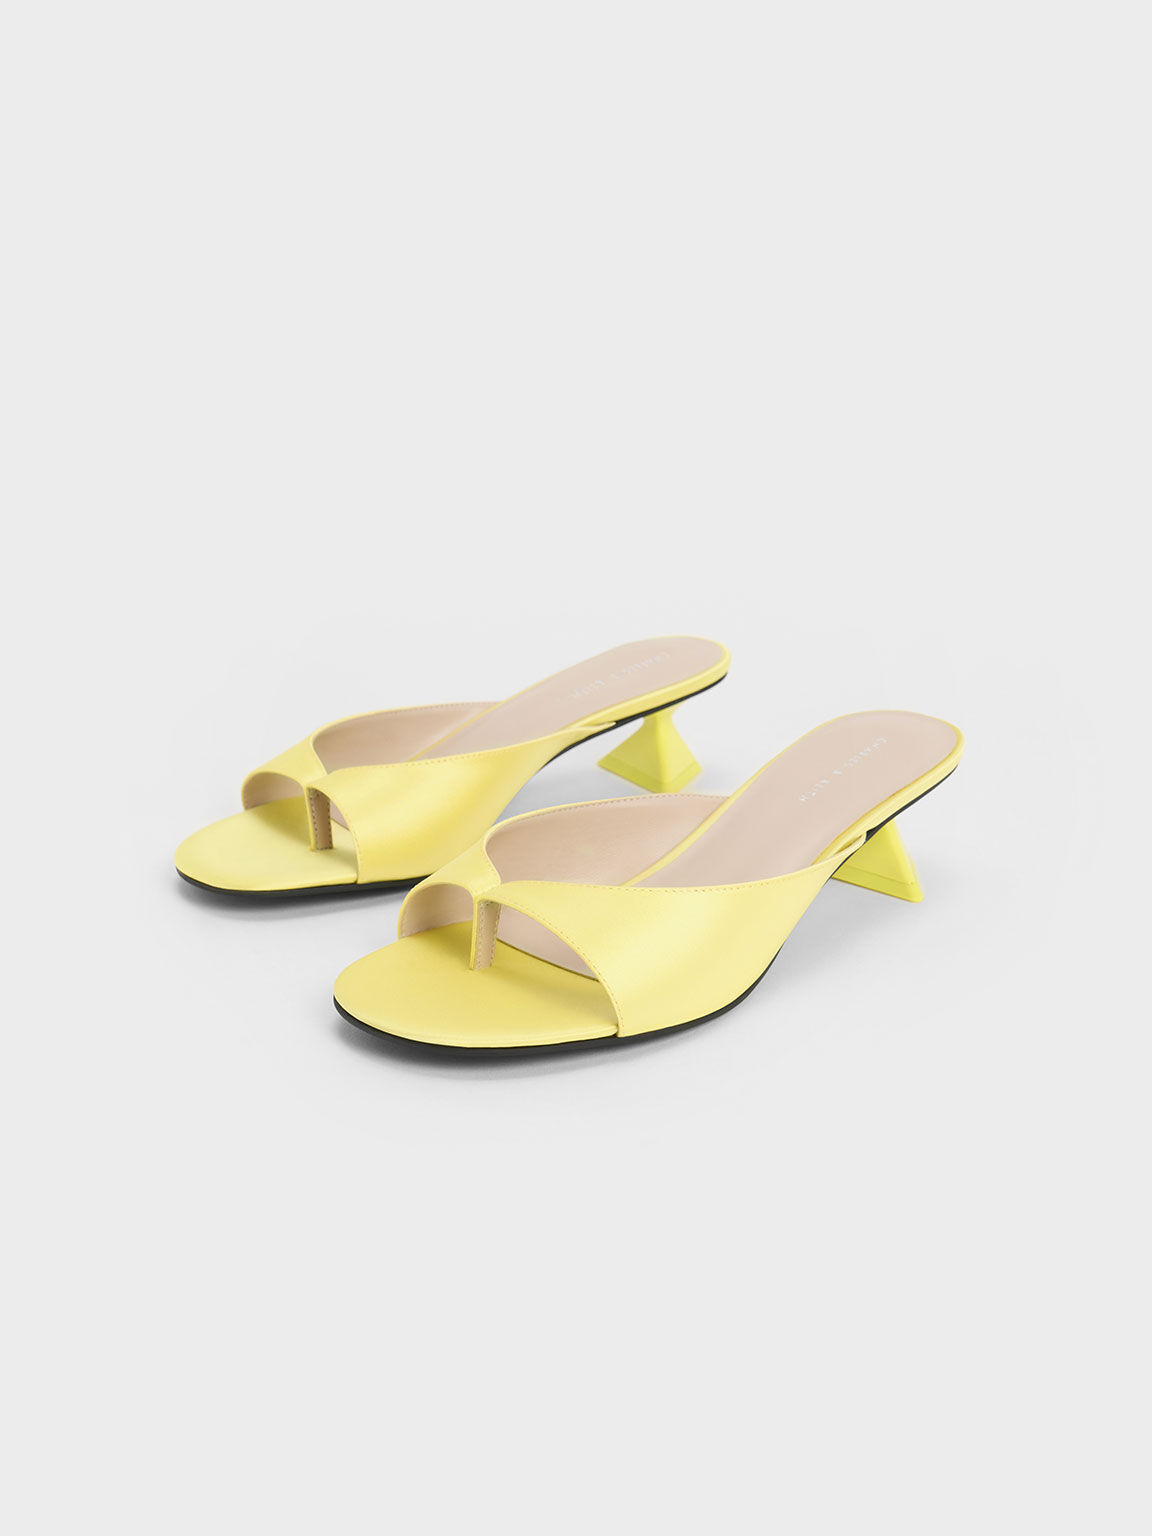 Sandal Thong Recycled Polyester Sculptural Heel, Yellow, hi-res